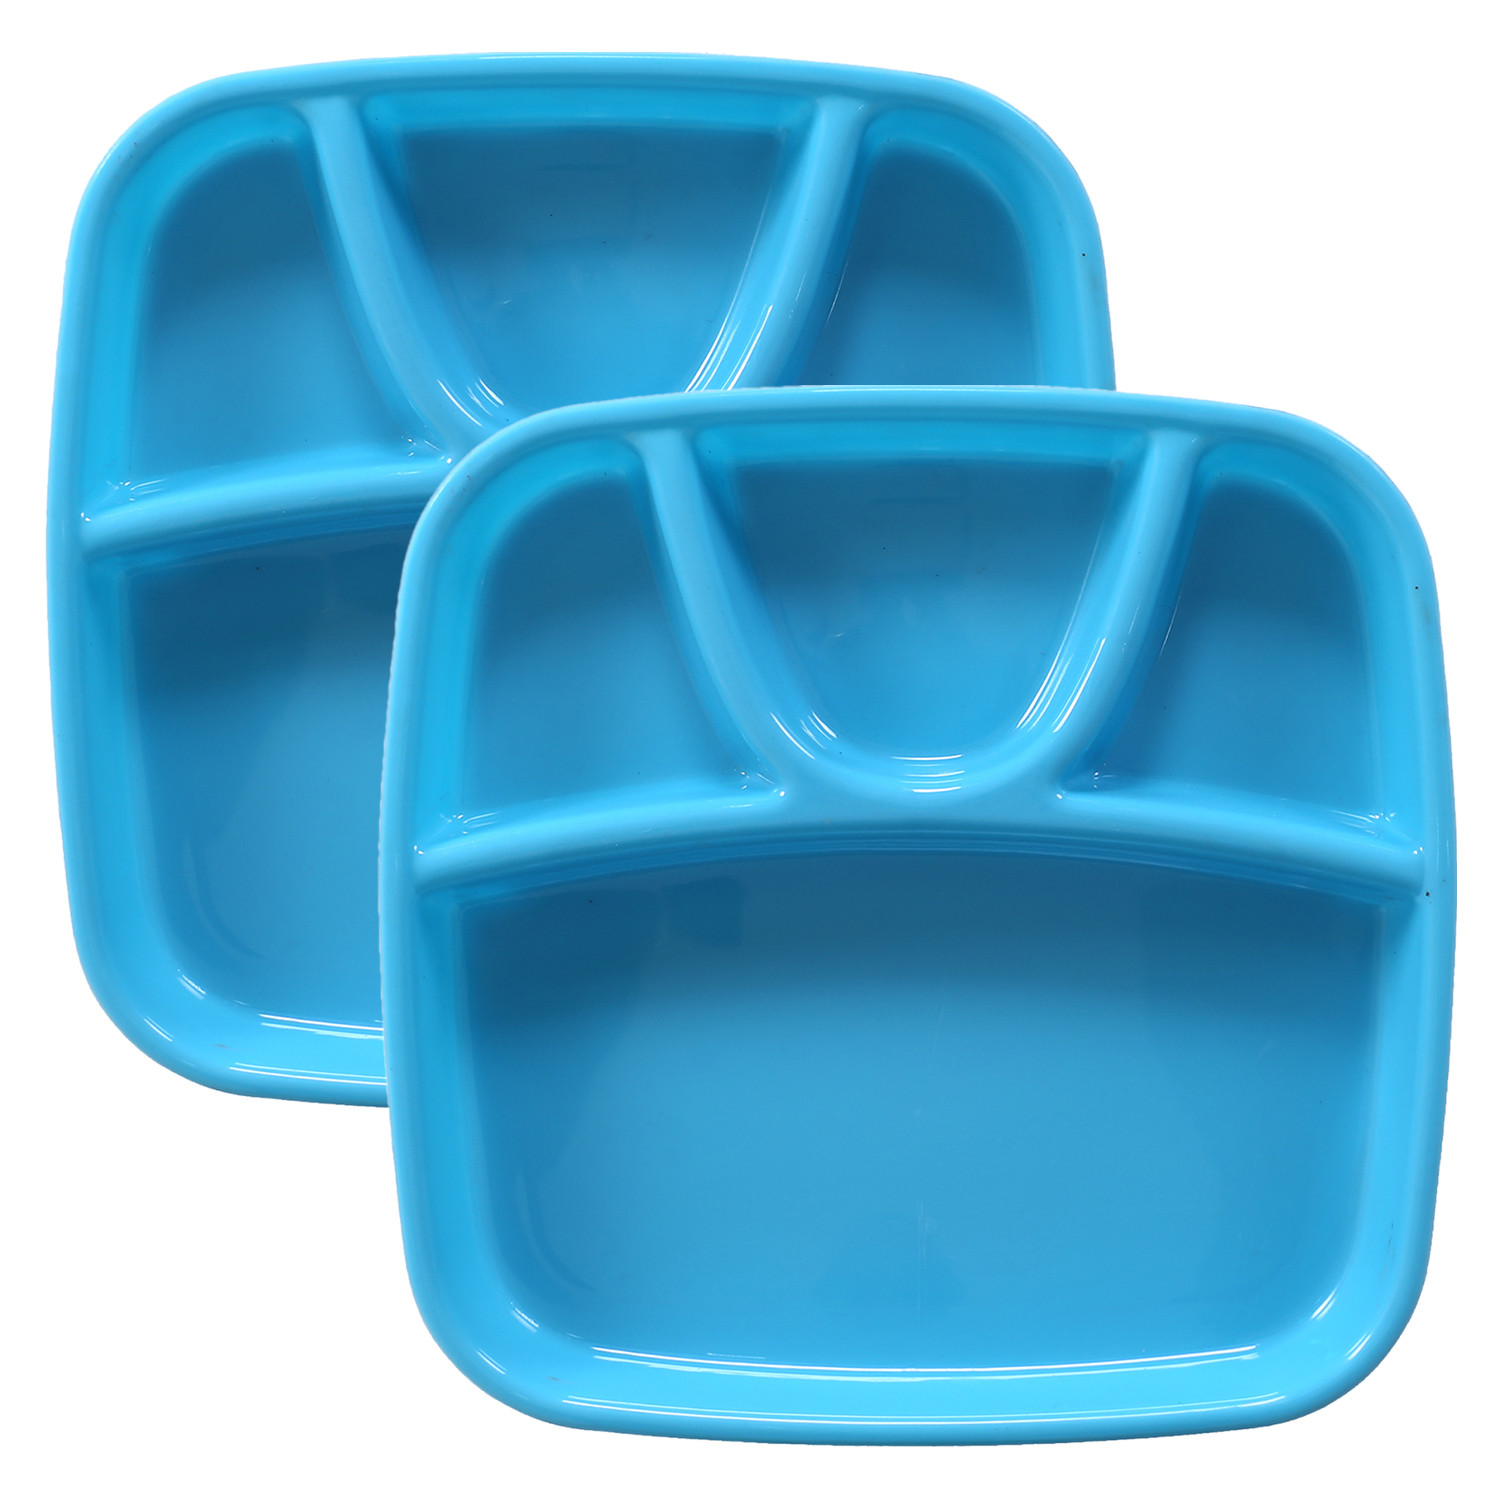 Kuber Industries Serving Plate|Plate Set For Dinner|Unbreakable Plastic Plates|Microwave Safe Plates|Food Organizer With 4 Partitions|(Sky Blue)